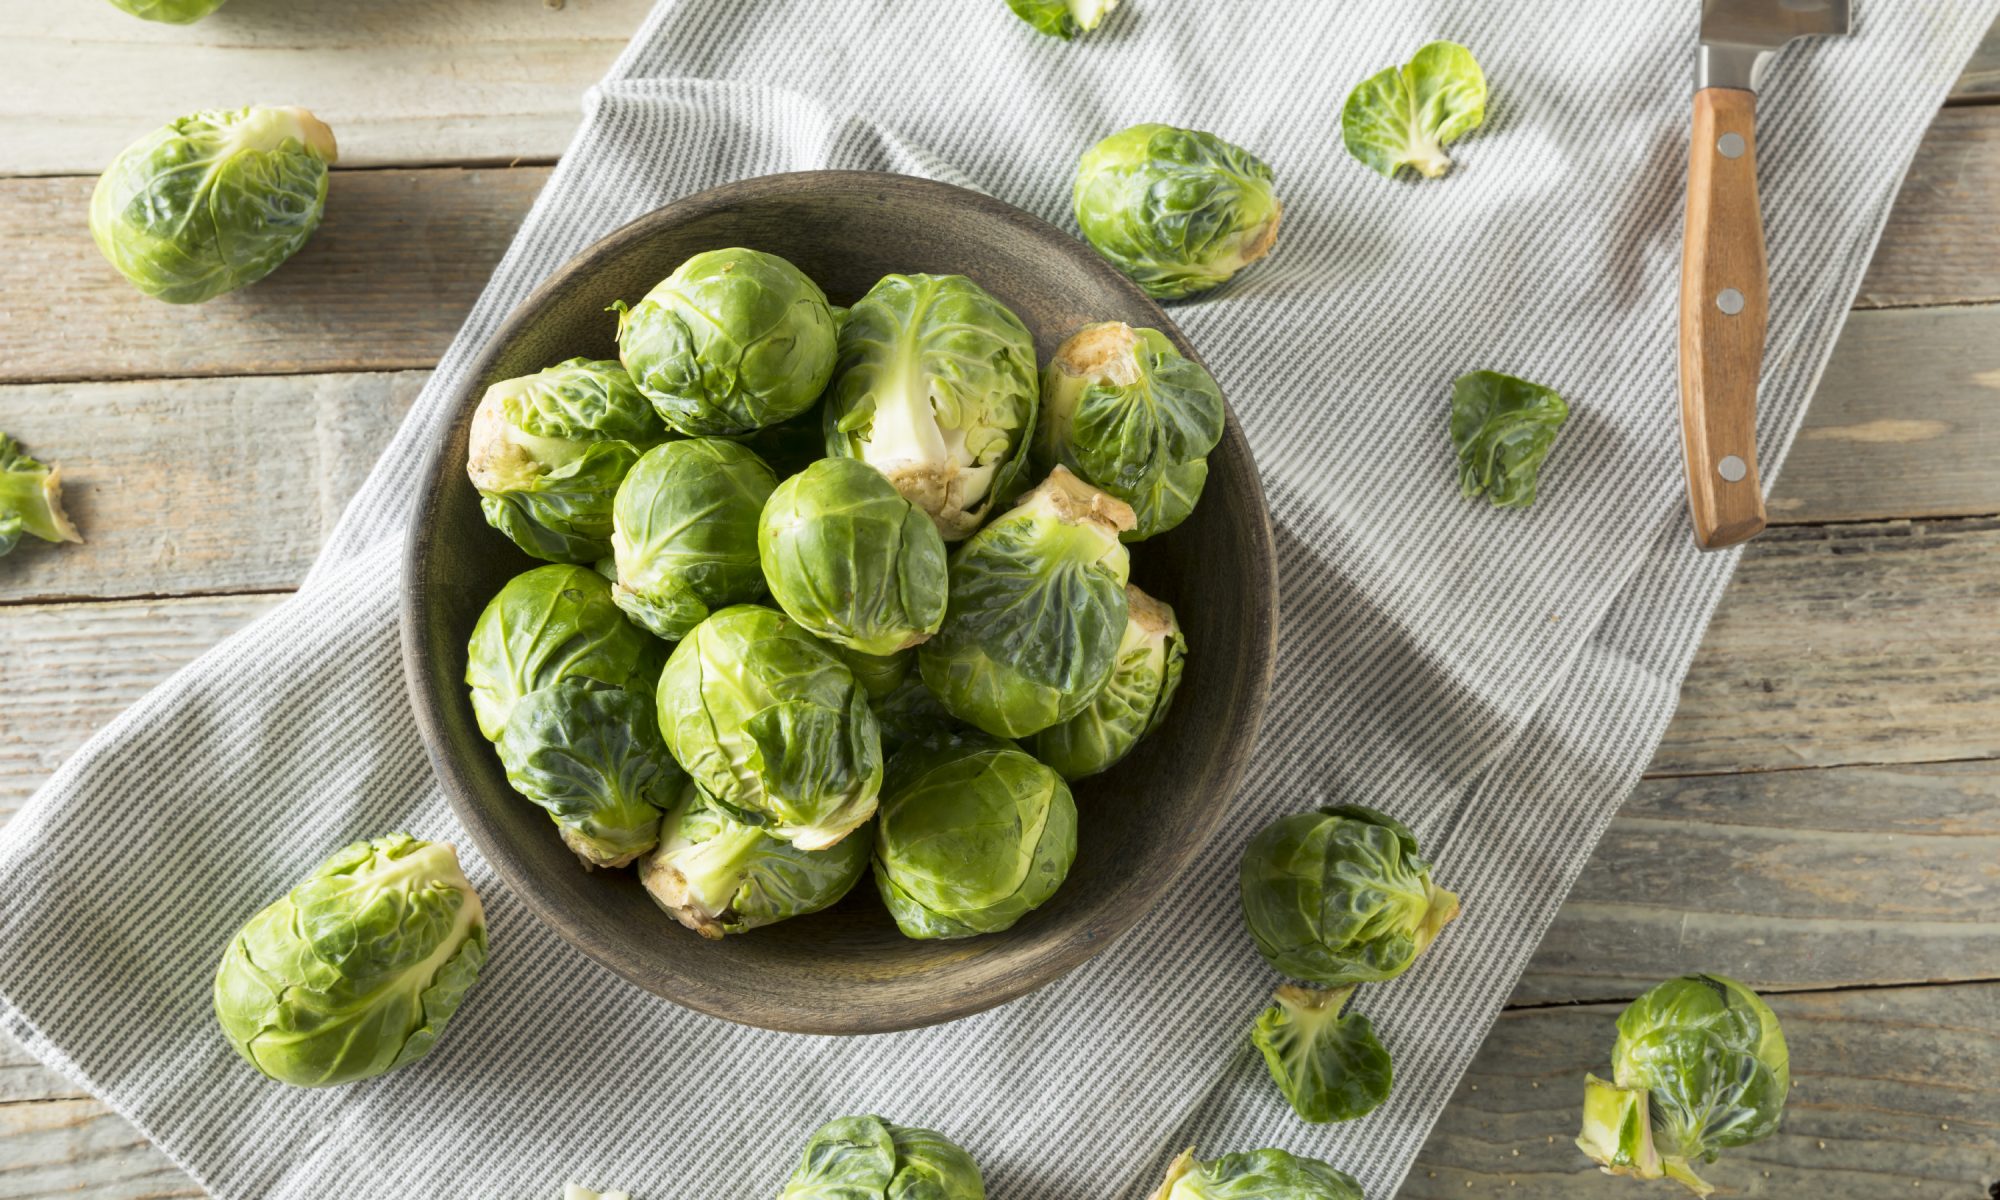 Raw Organic Green Brussel Sprouts Ready to Cook